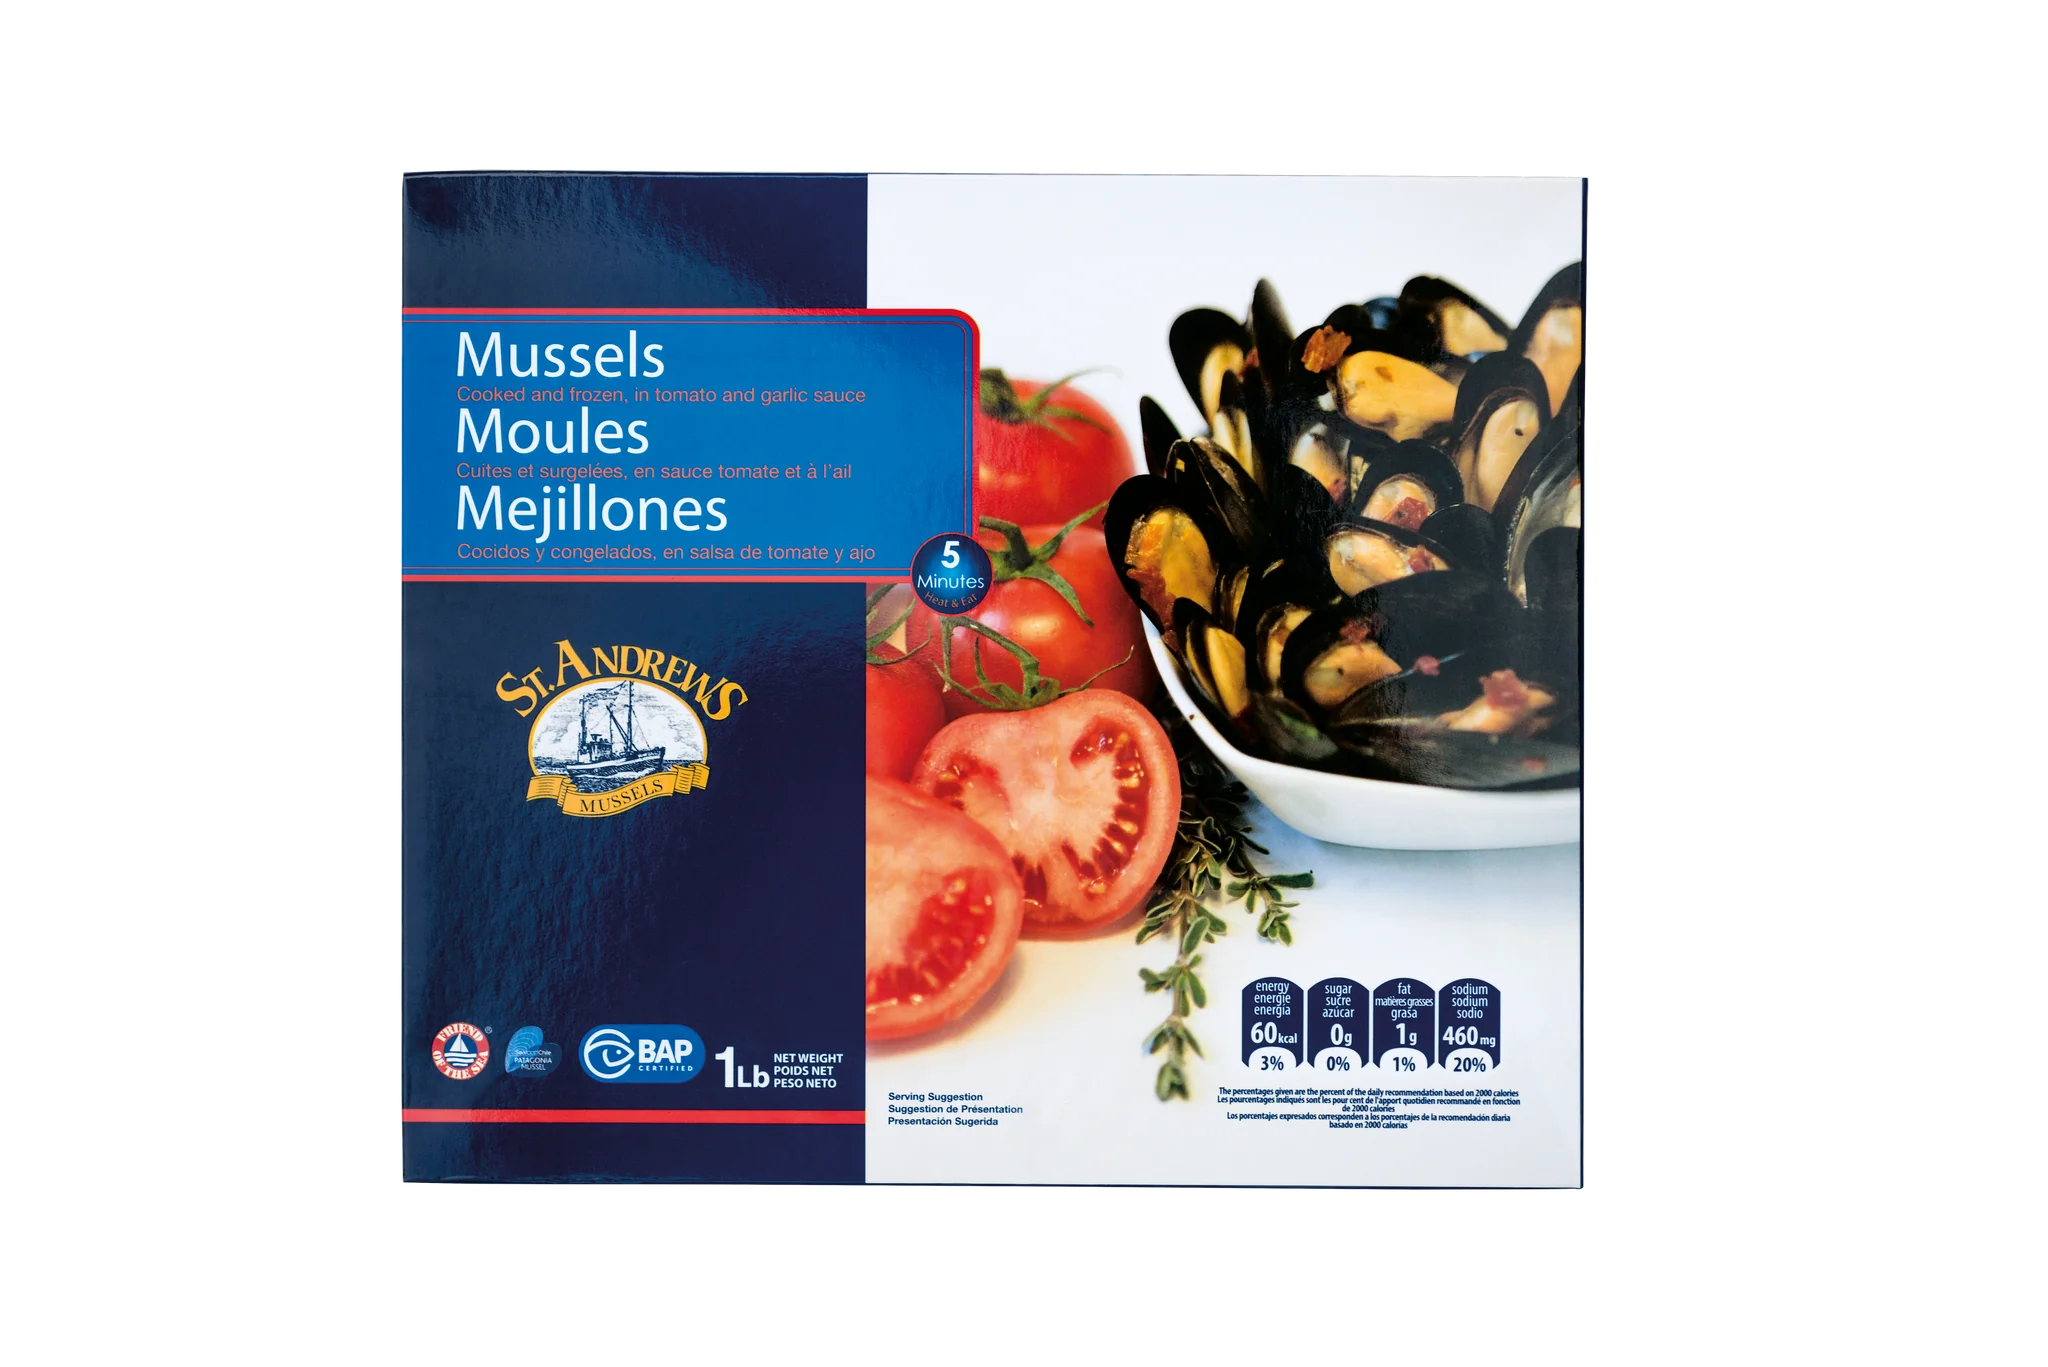 St. Andrews Cooked Mussels (Tomato & Garlic)1lb